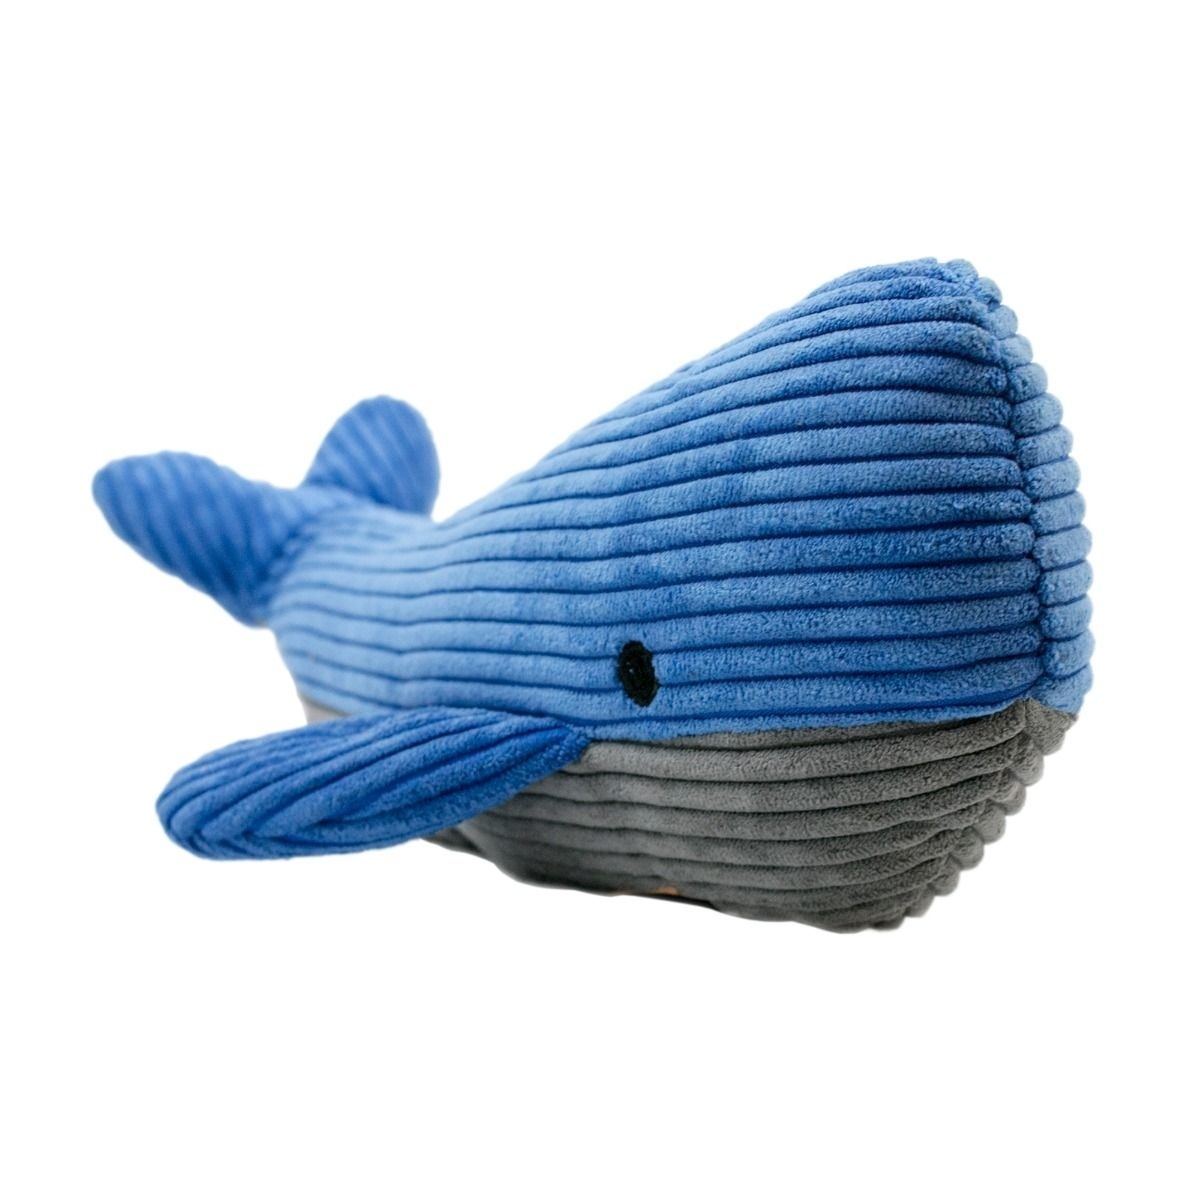 https://cdn.shoplightspeed.com/shops/614283/files/31733121/tall-tails-tall-tails-dog-toy-blue-whale-14-in.jpg